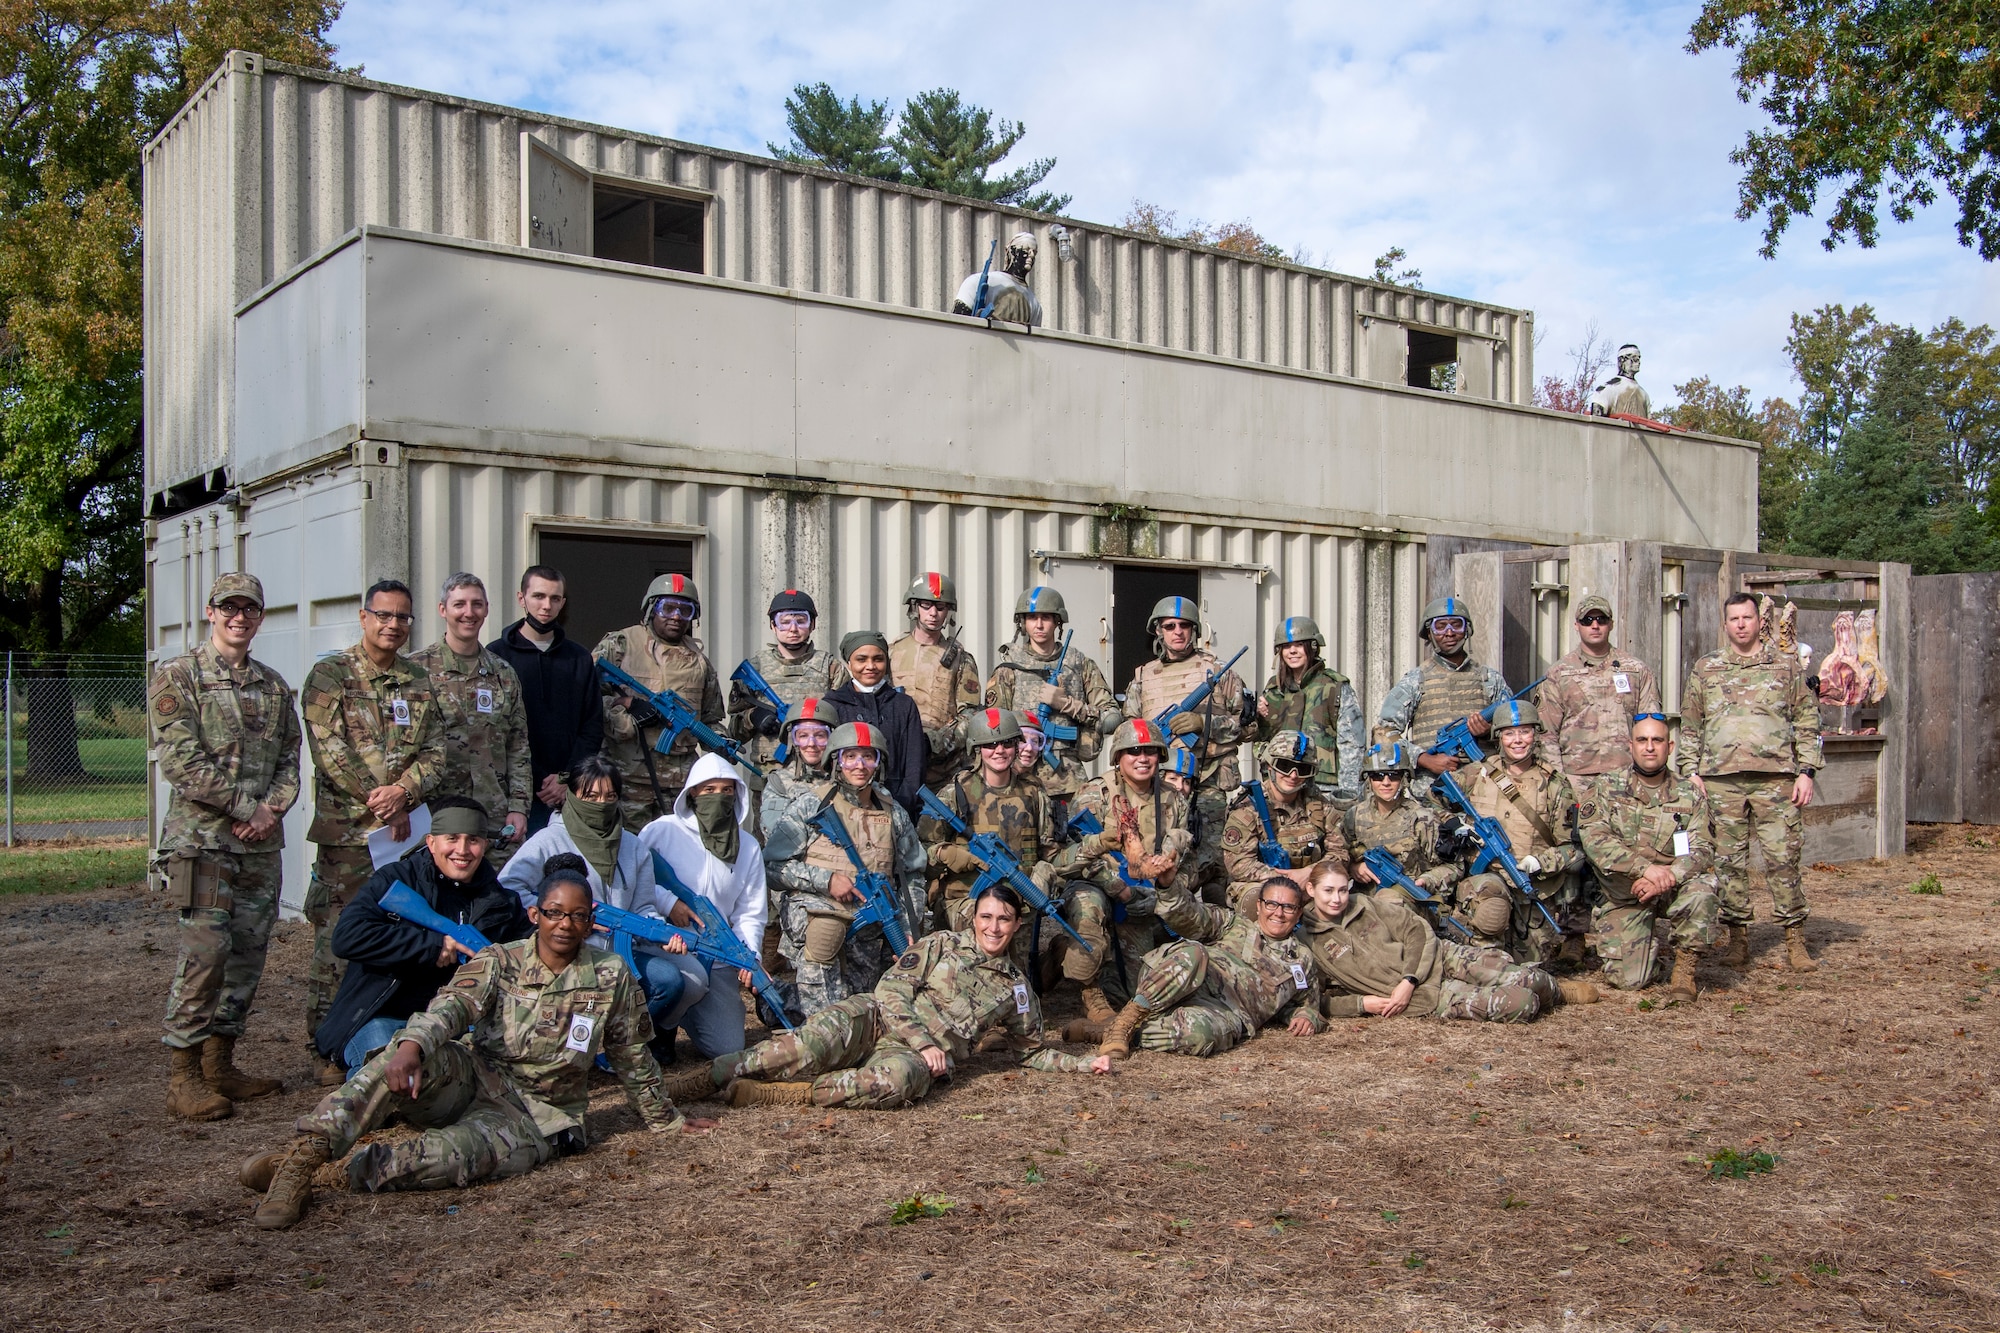 U.S. Airmen from the 514th Air Mobility Wing and the 421st Combat Training Squadron, both at Joint Base McGuire-Dix-Lakehurst, New Jersey, the 171st Air Refueling Wing, Pennsylvania, and the Office of the Surgeon General, Headquarters U.S. Air Force, Virginia, pose for a photo at the Medical Simulation and Training Center at JB MDL, N.J., October 31, 2021. The Airmen participated in a pilot program Tactical Combat Casualty Care course designed to provide members who are not normally involved in combat environments the skills to survive and care for casualties in the event they are under attack.